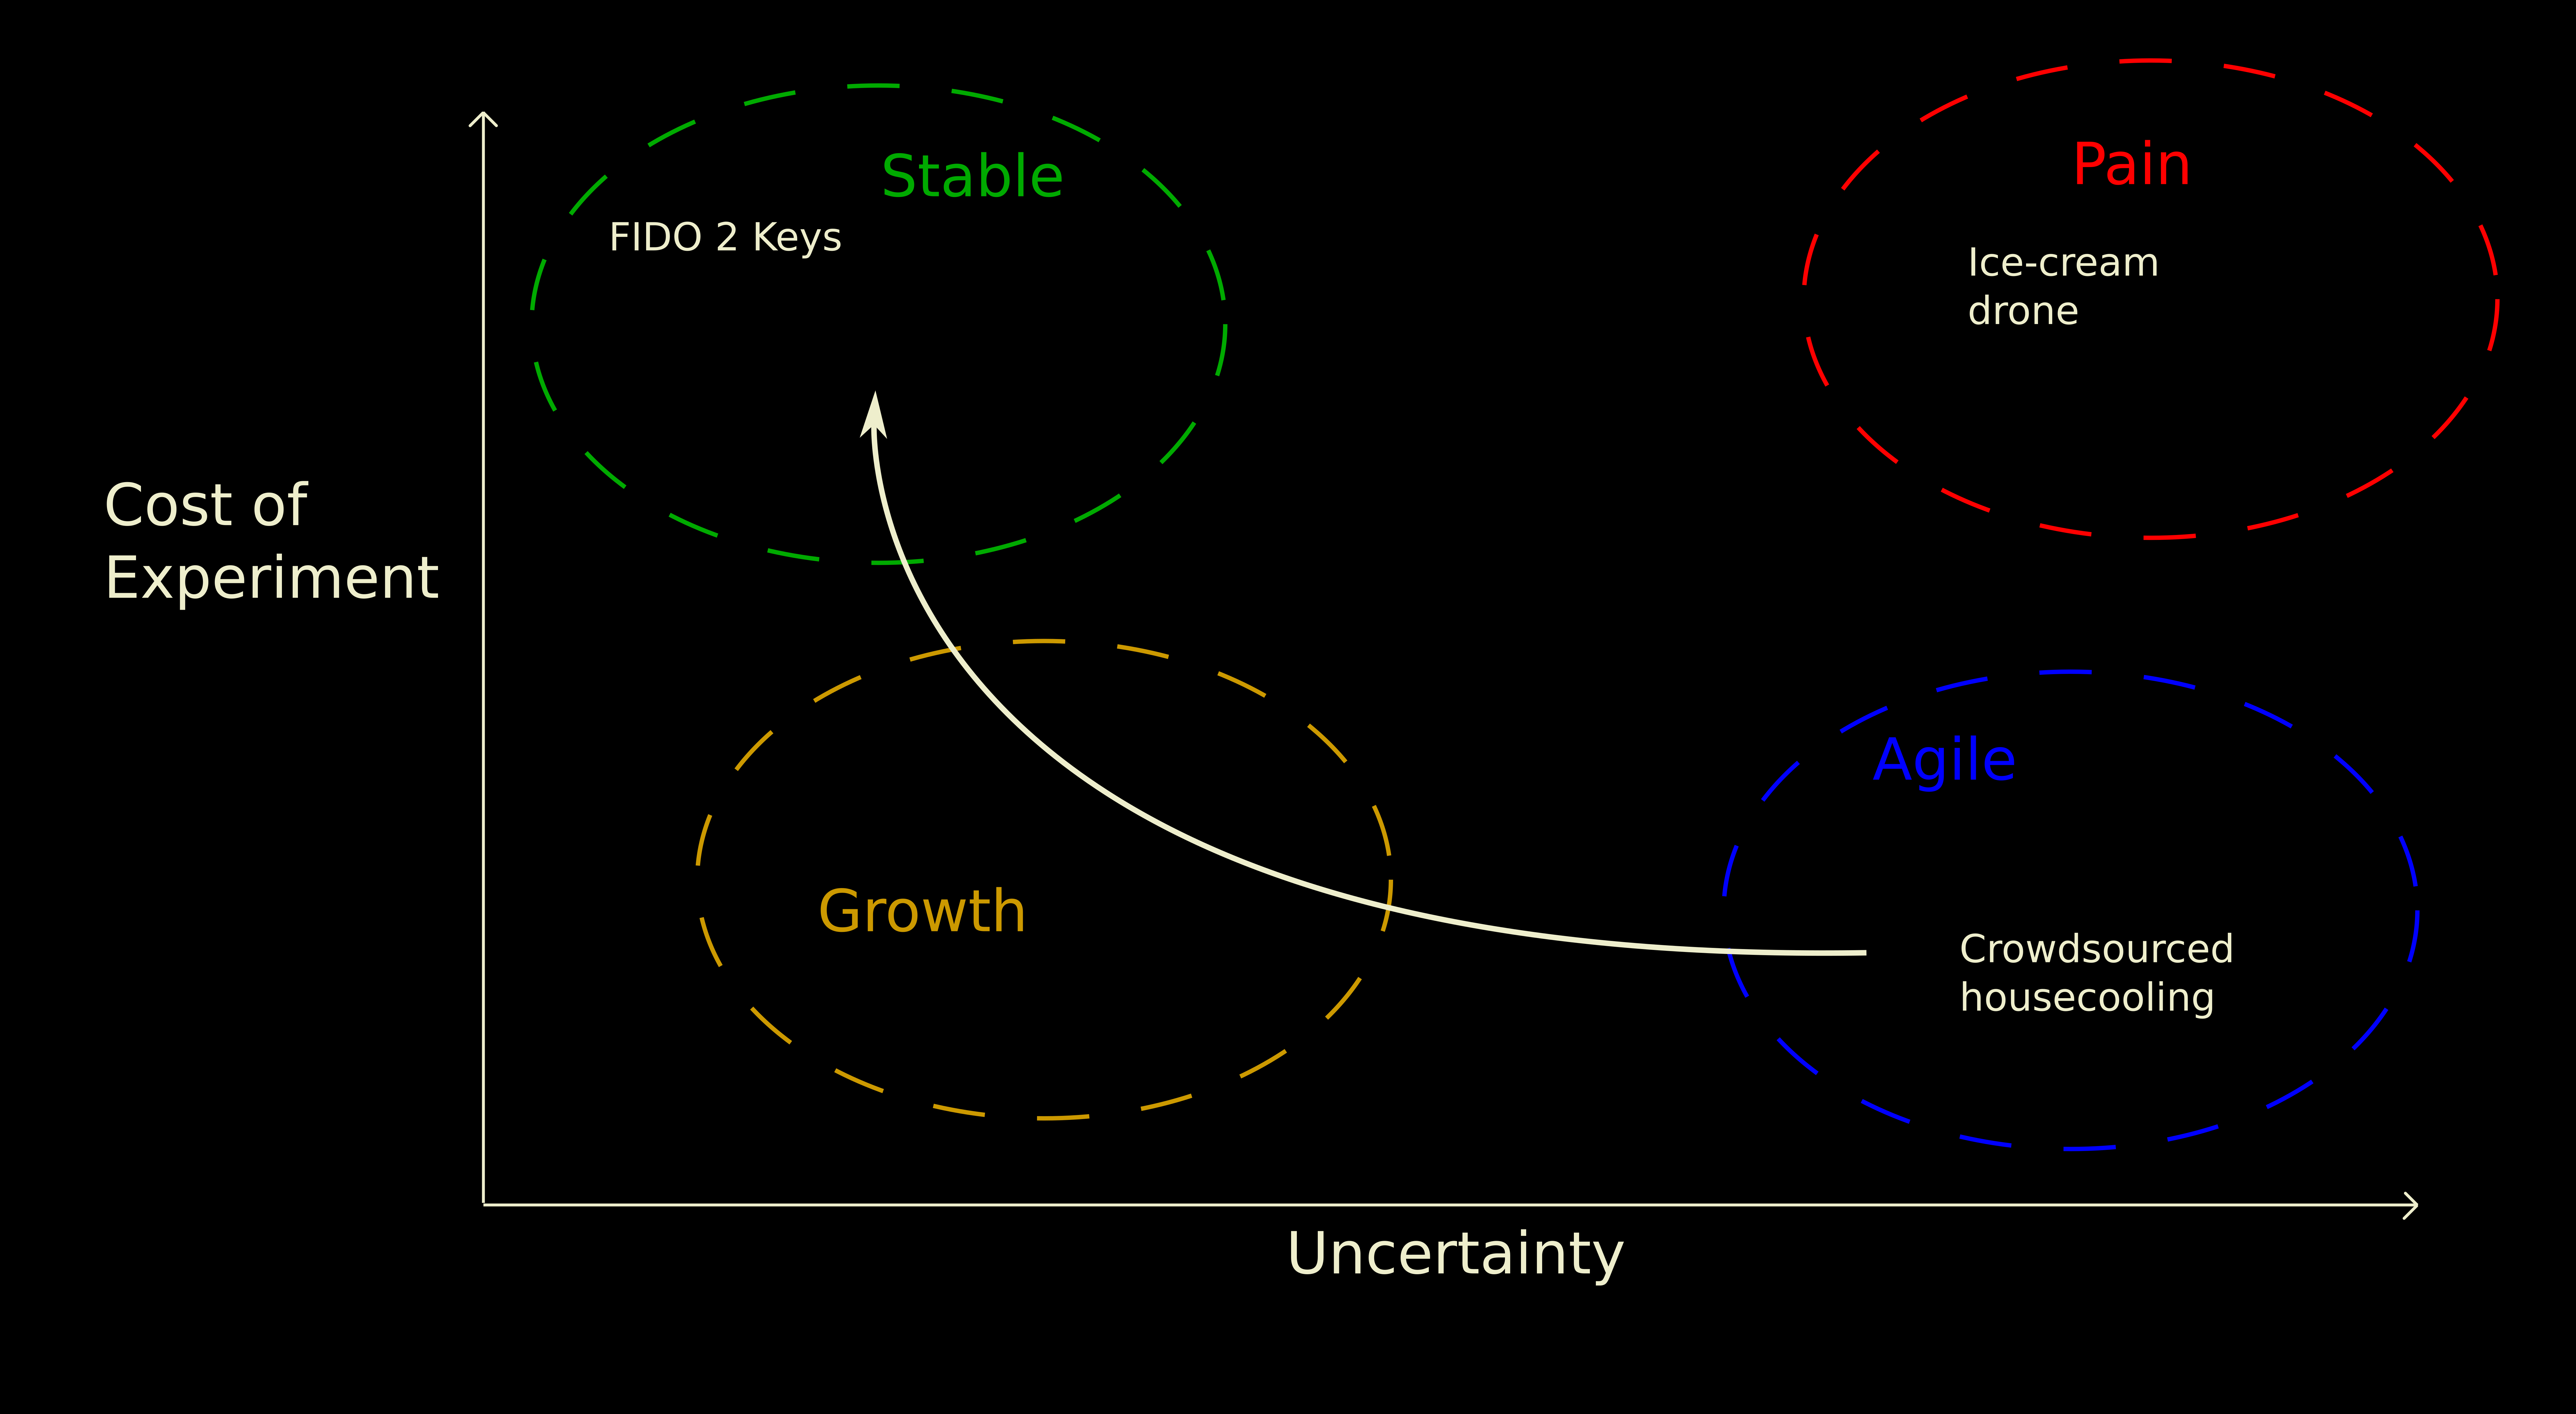 The same graph, with an arrow sweeping from the bottom-right first (the Agile zone) leftwards, then upwards. From high uncertainty to low uncertainty, and then from low cost-of-experiment to high cost-of-experiment. It ends in the Stable zone in the top-left.